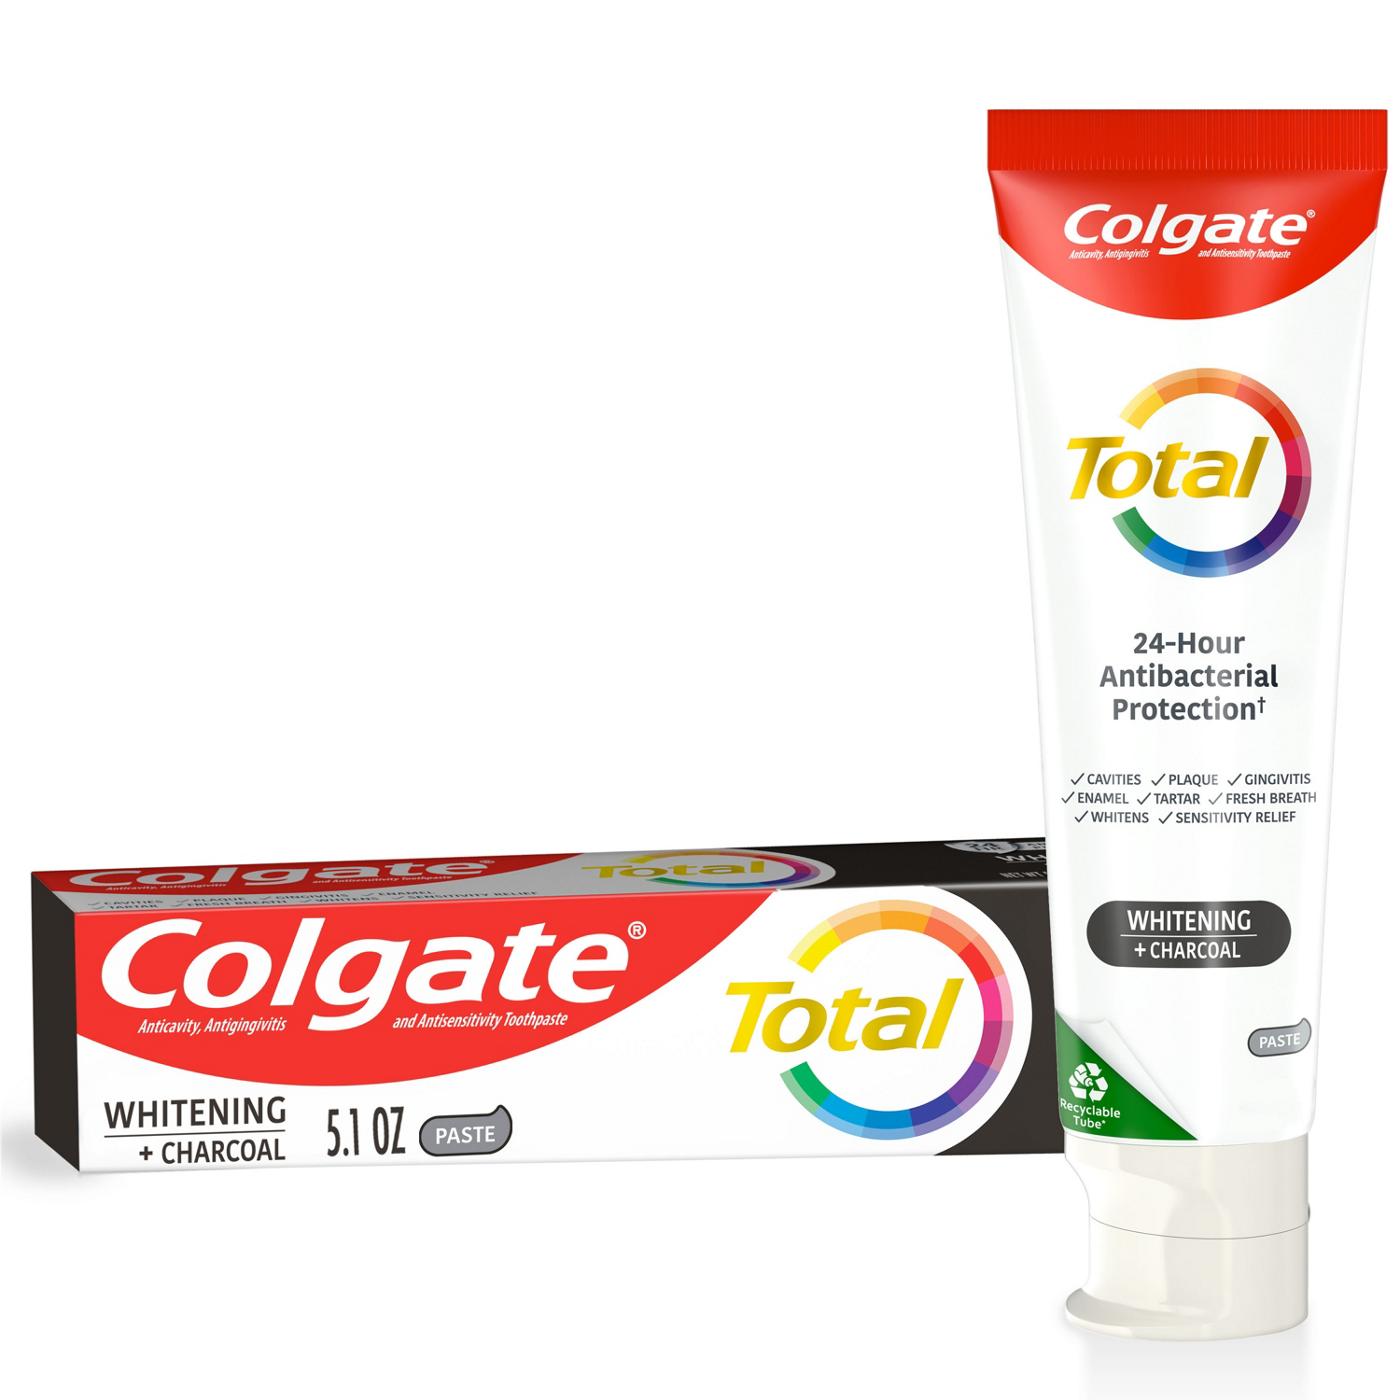 Colgate Total Whitening + Charcoal Toothpaste; image 11 of 12